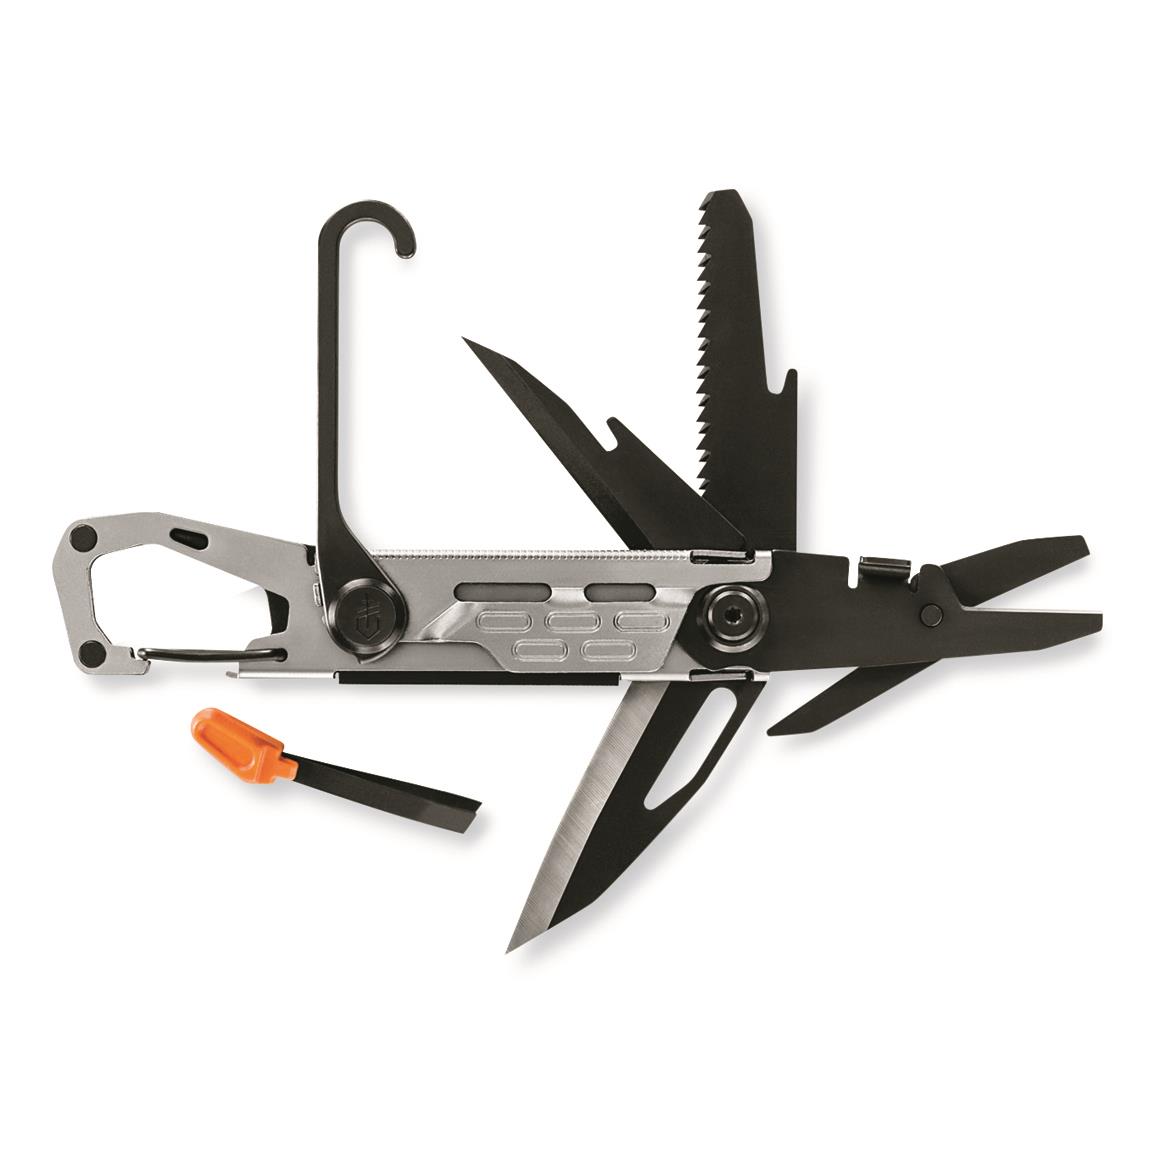 Gerber Stake Out Multi-Tool, Silver